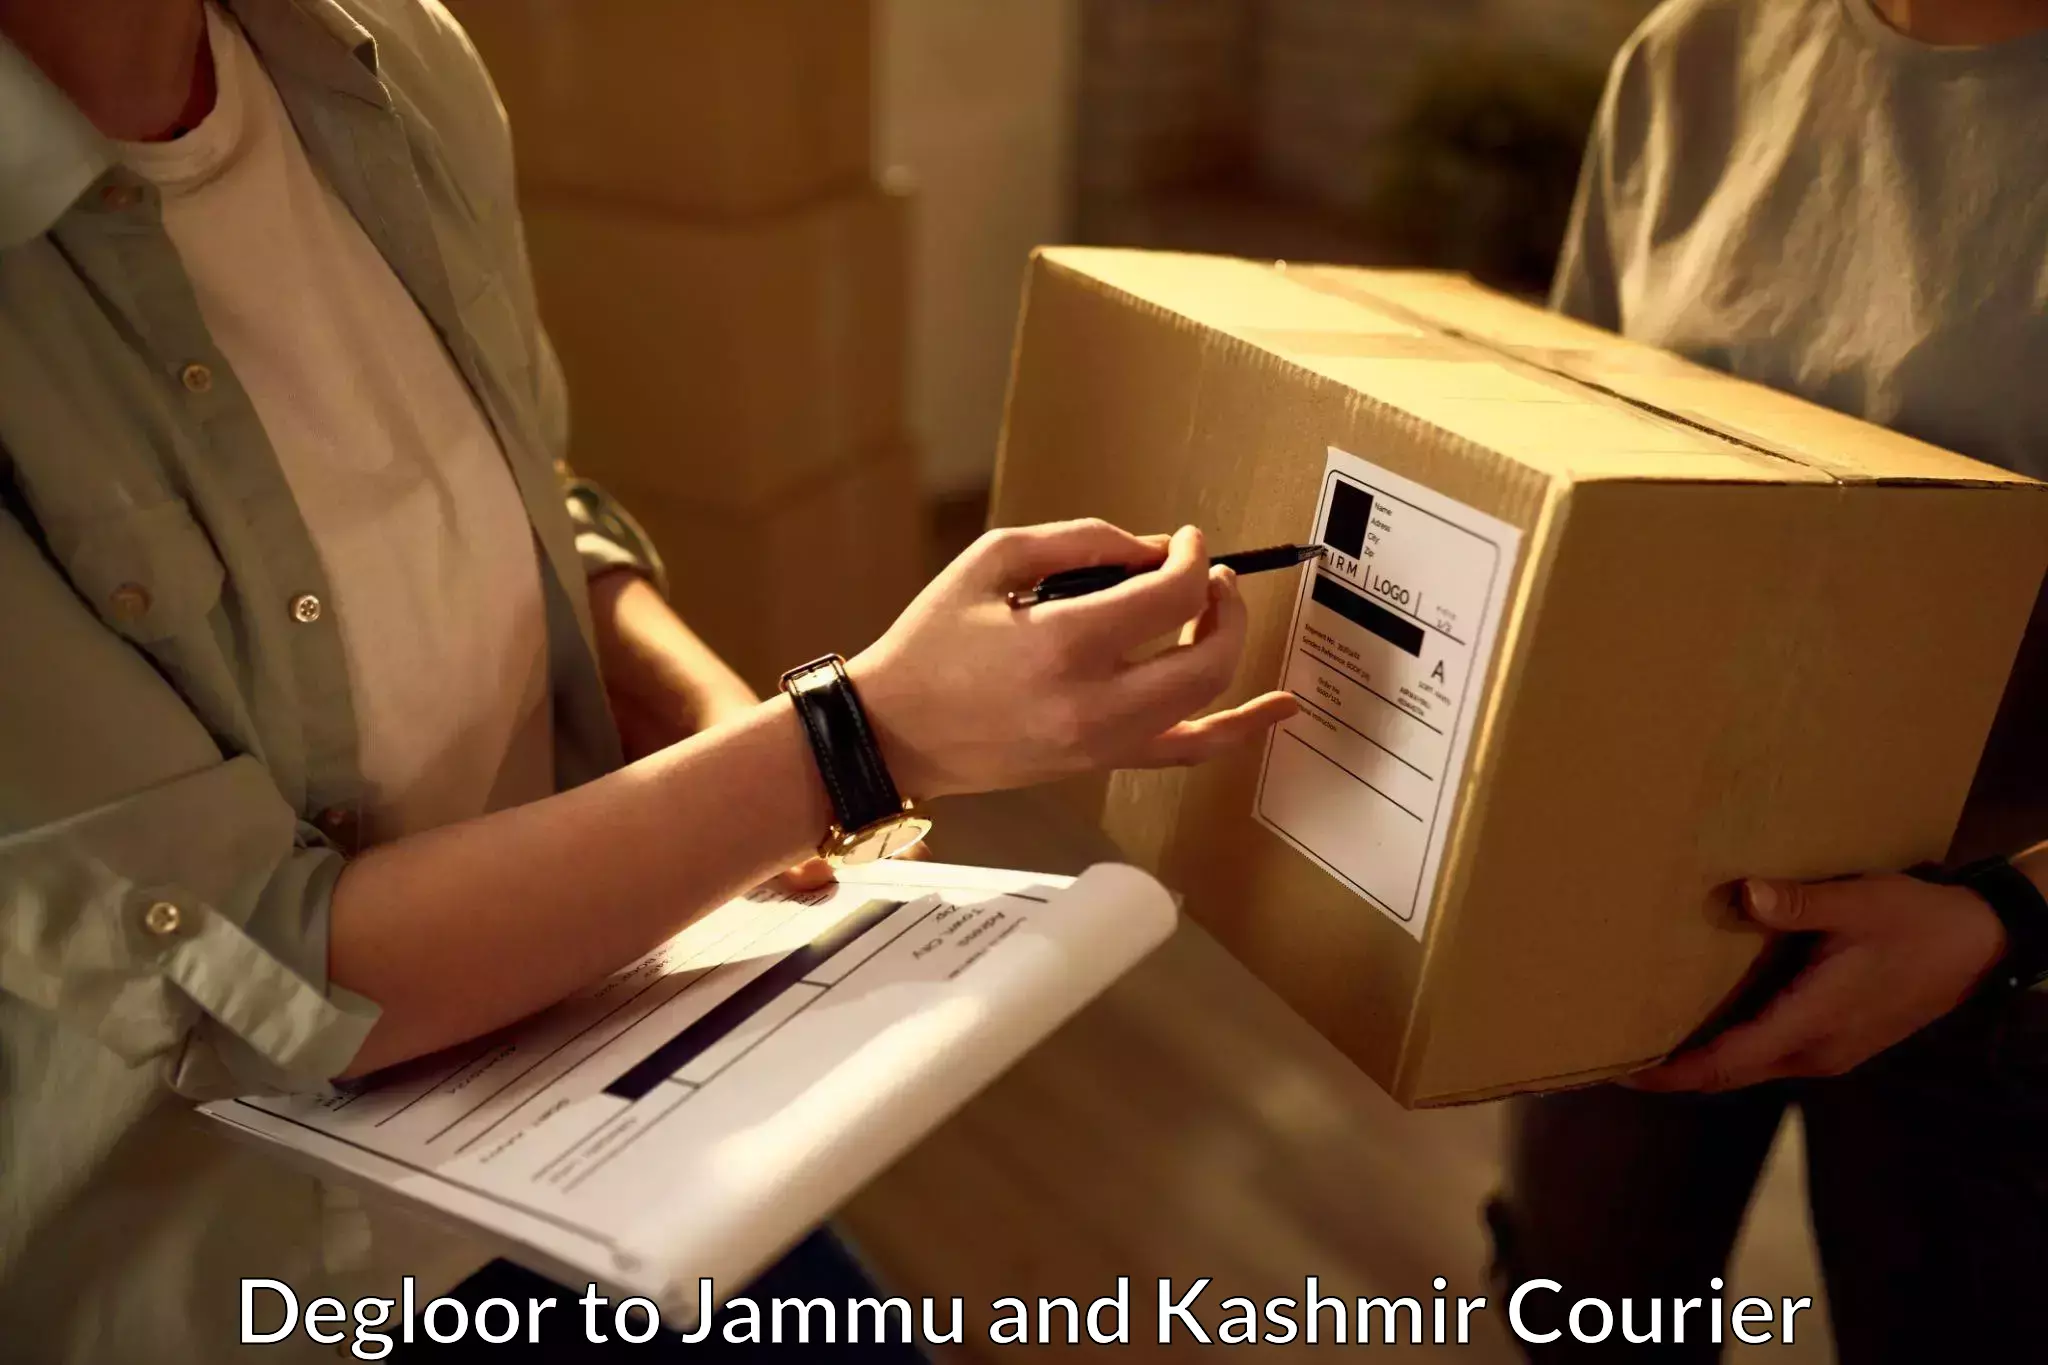 Subscription-based courier Degloor to University of Jammu